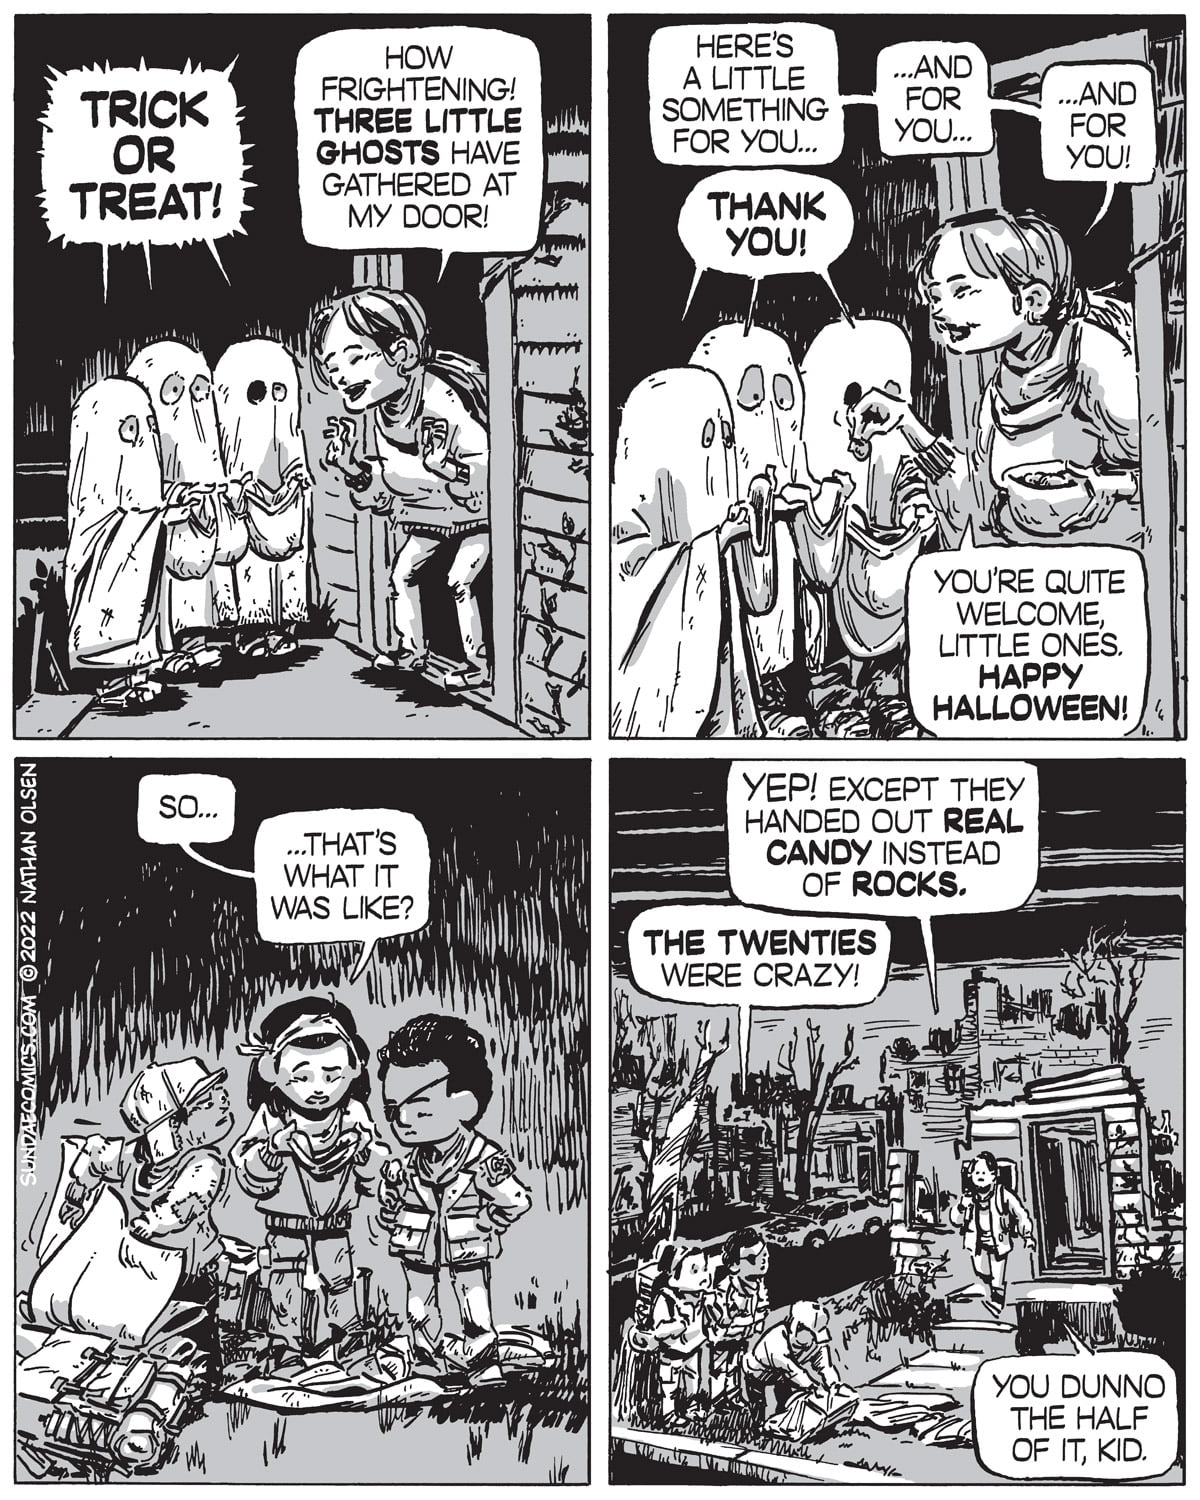 Three little ghosts go trick-or-treating and learn about Halloween in this sci-fi inspired comic.